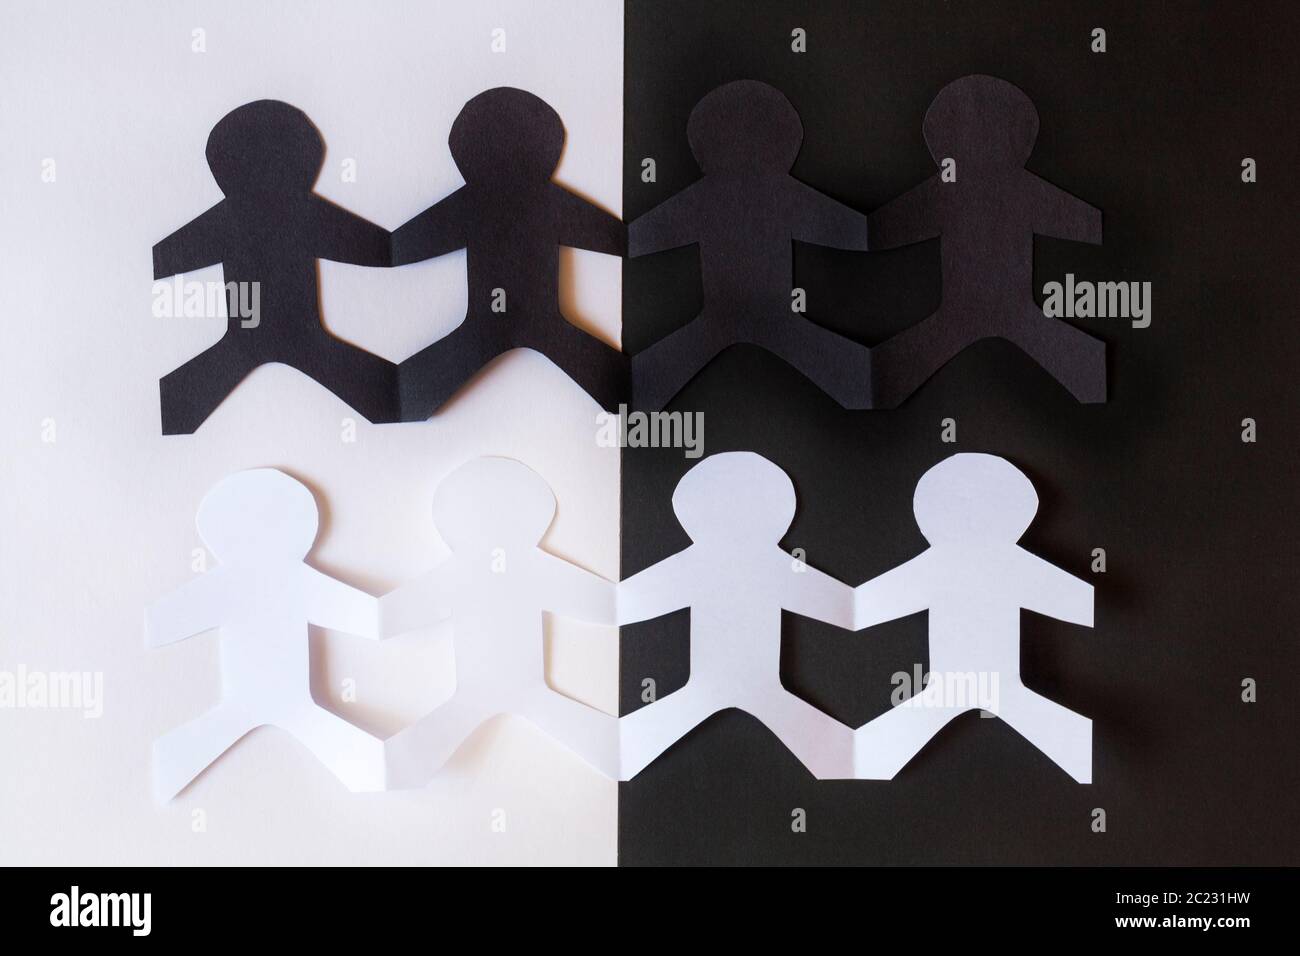 Black and white people paper chain - concept anti racism, equality, diversity, all lives matter Stock Photo